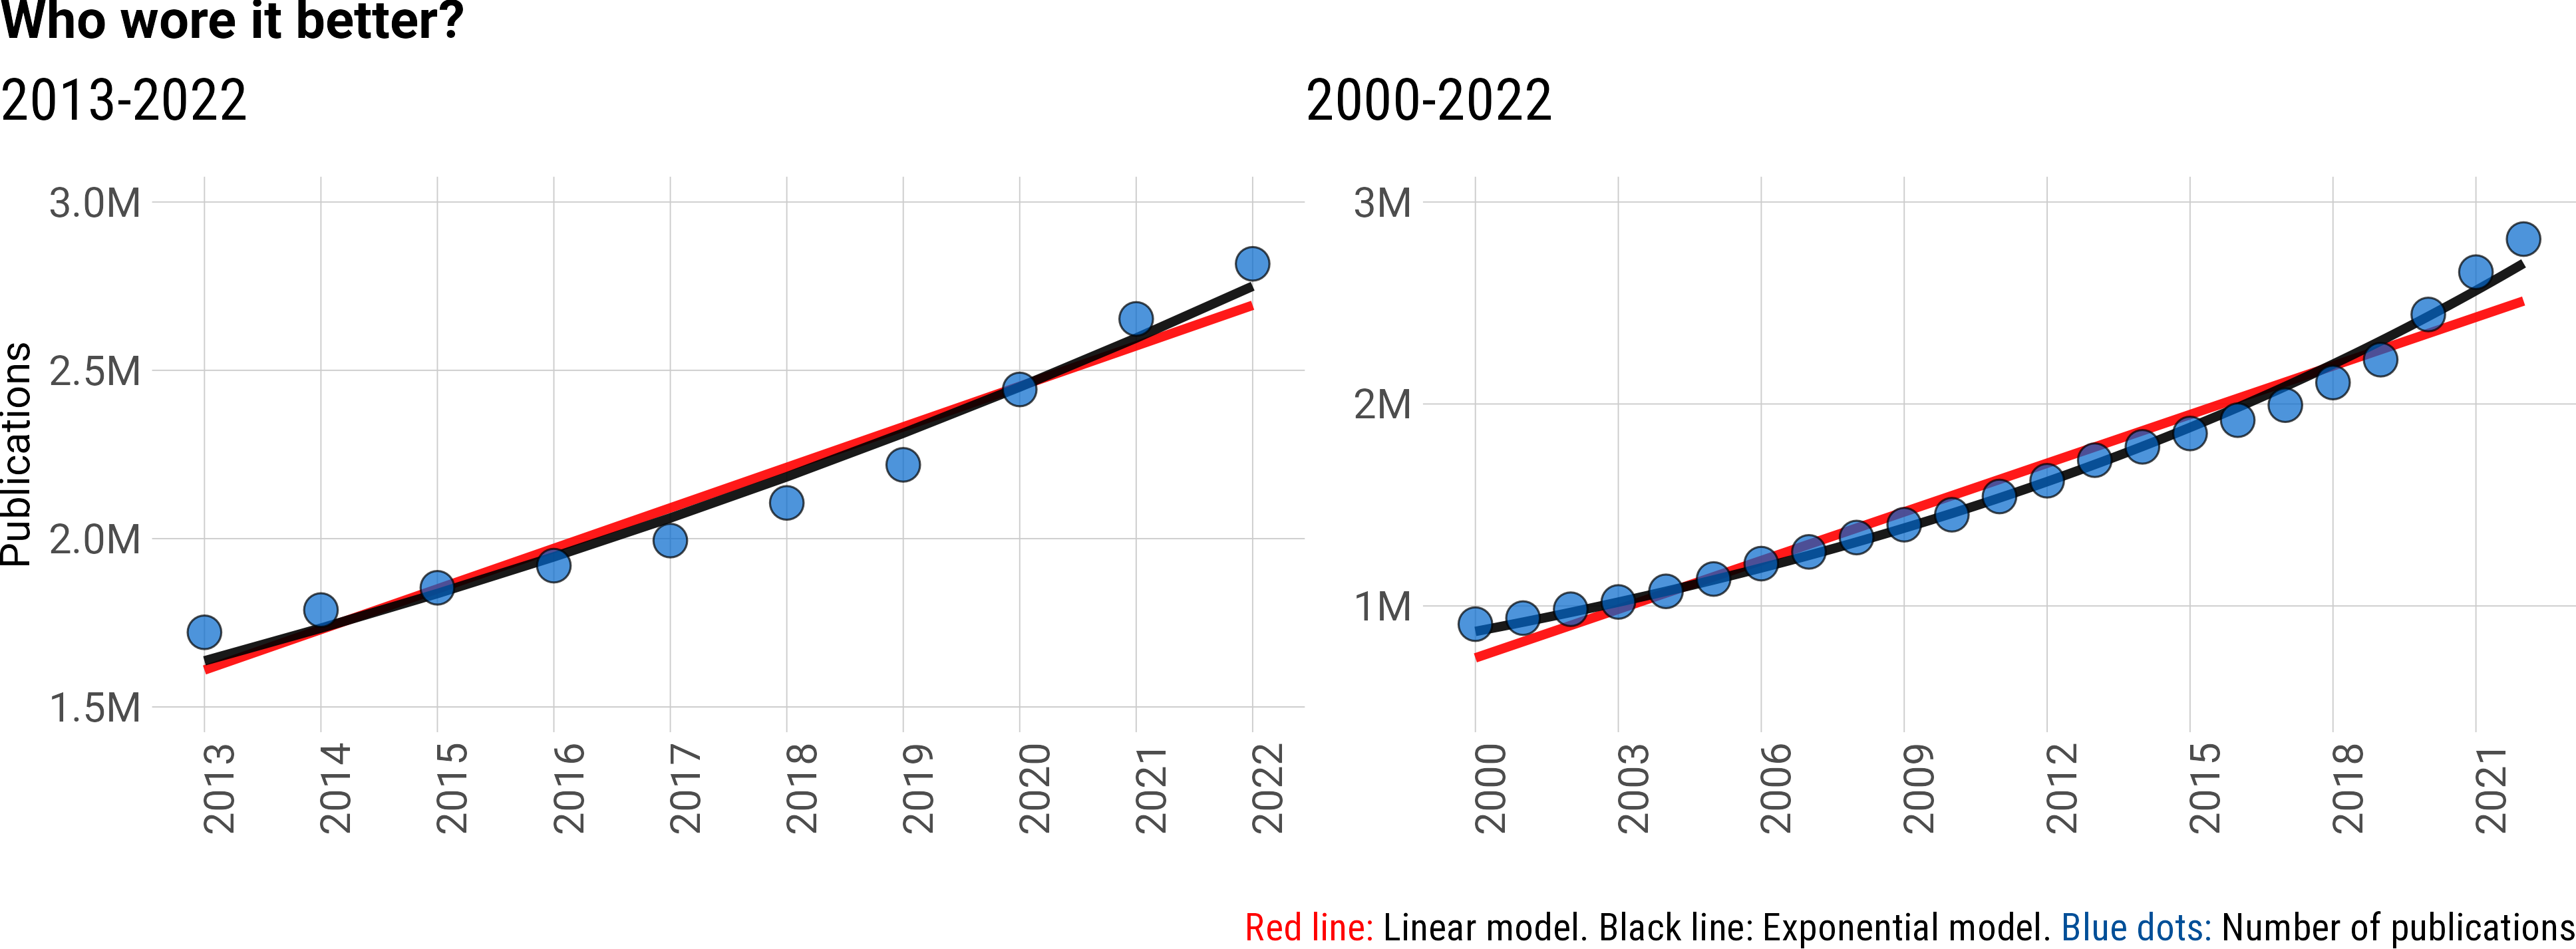 Who wore it better? Linear (red), or exponential (black)?